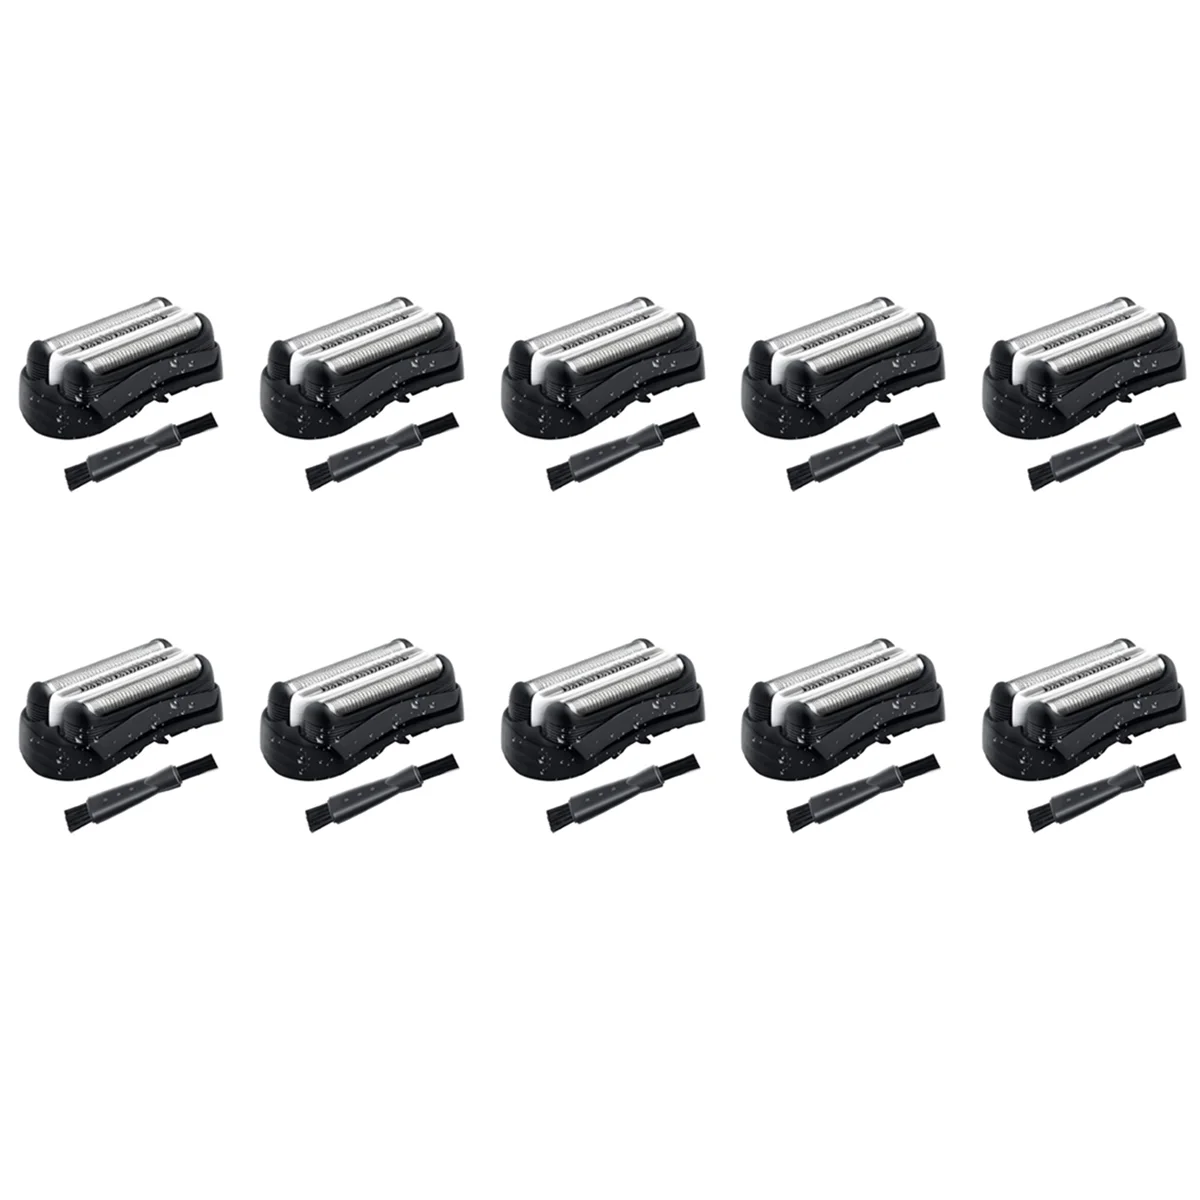 

10X 32B Shaver Head Replacement for Braun 32B Series 3 301S 310S 320S 330S 340S 360S 380S 3000S 3020S 3040S 3080S